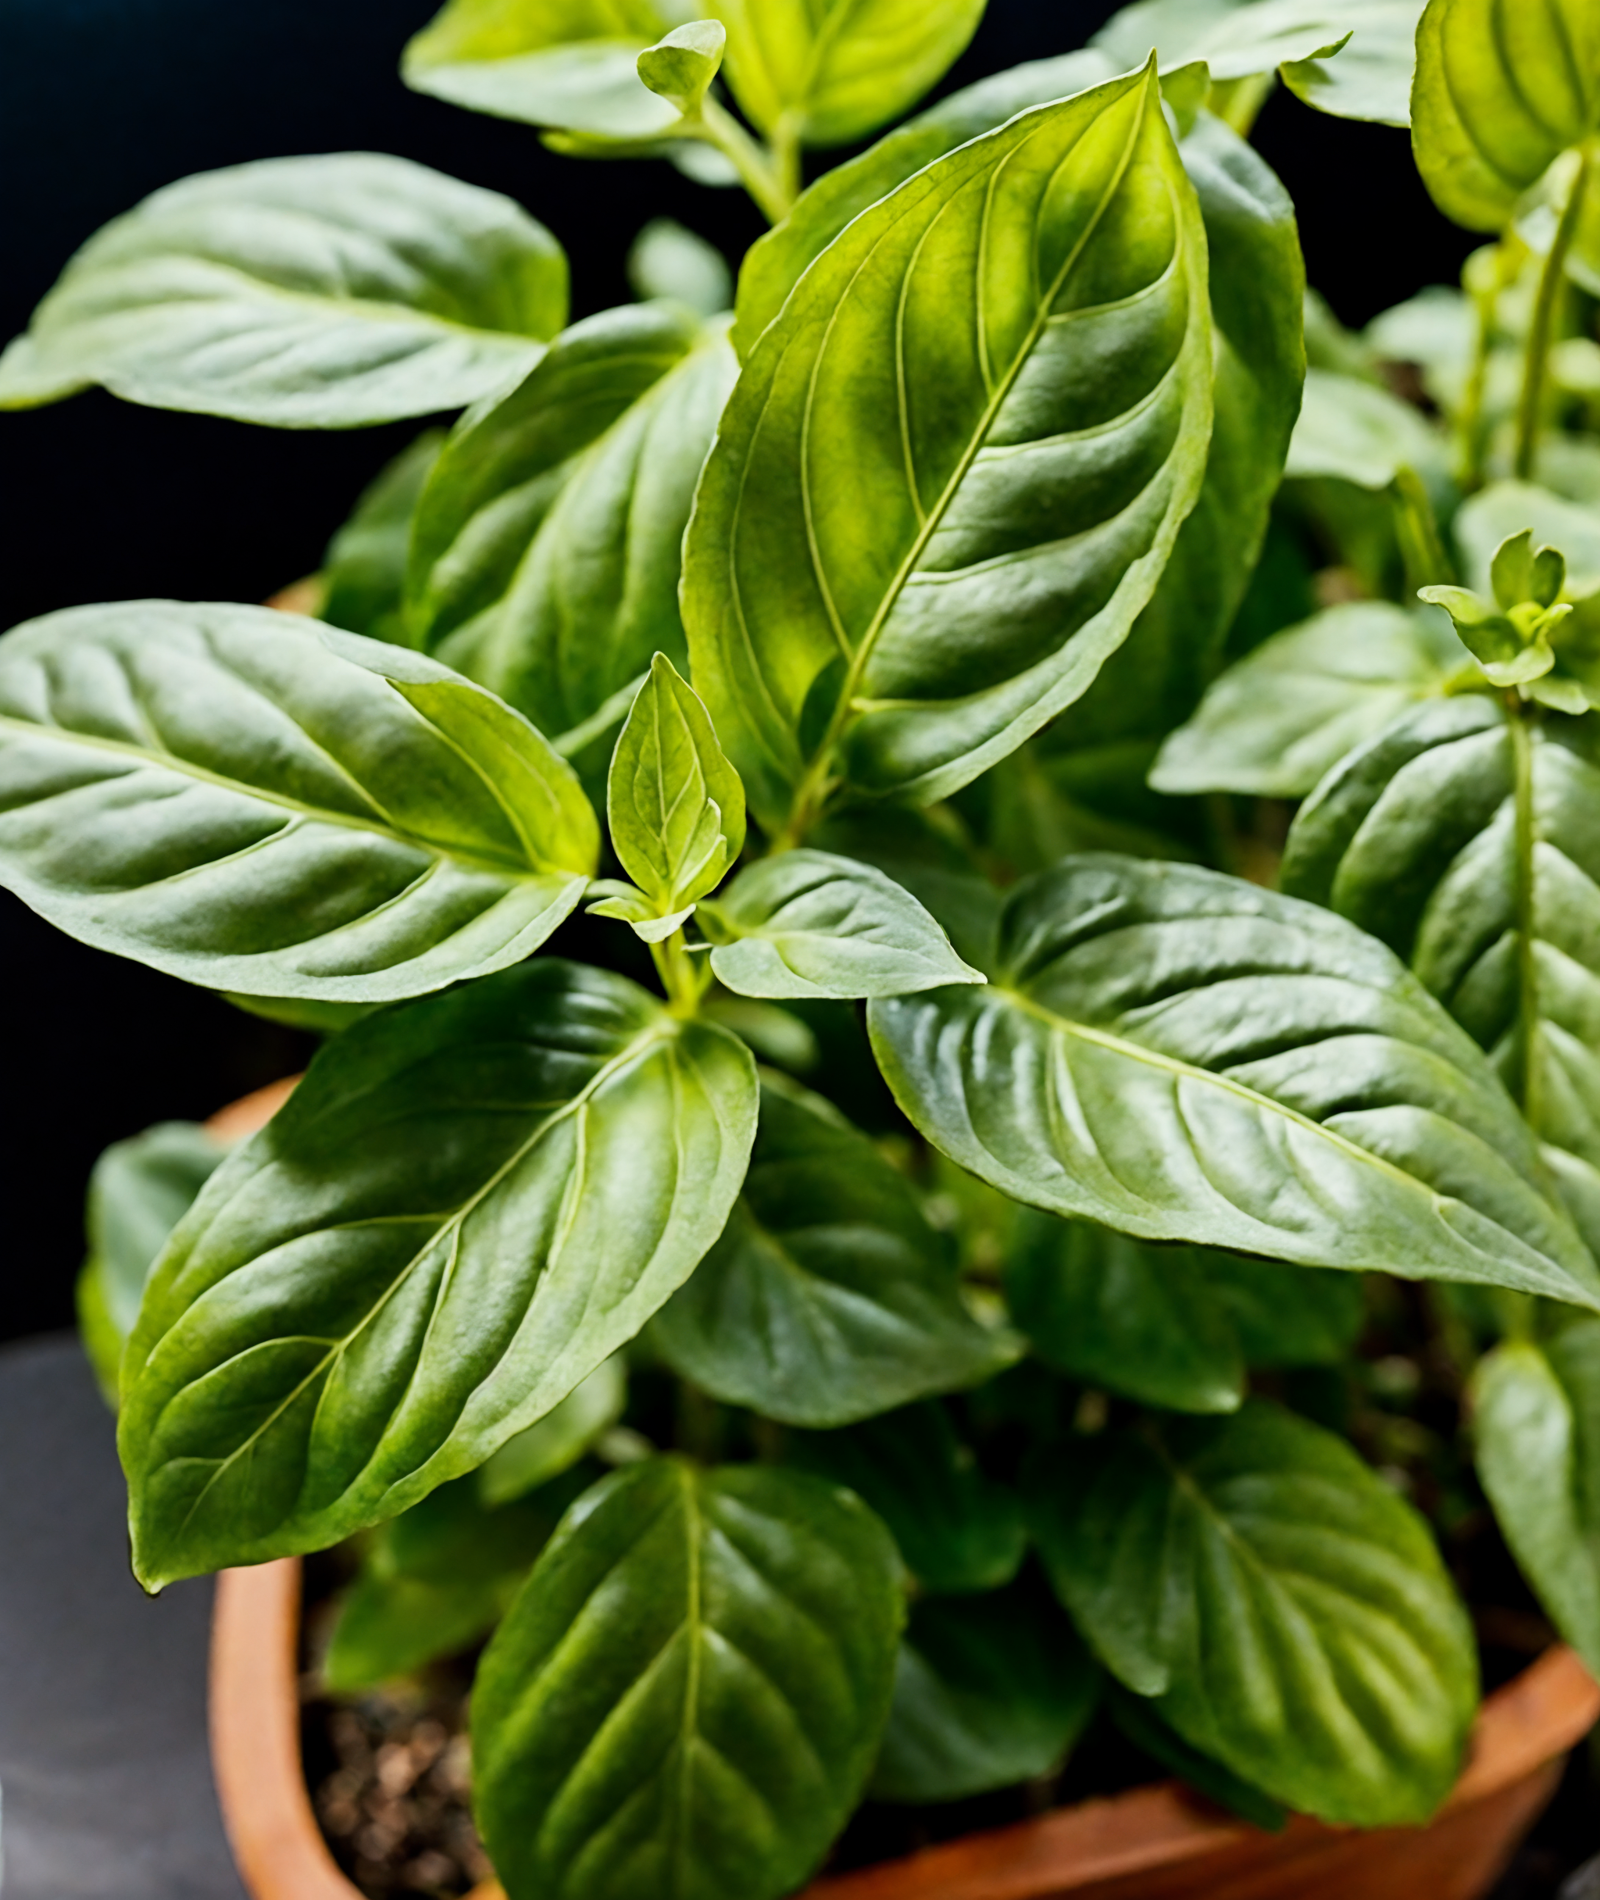 Potted Ocimum basilicum (basil) with vibrant green leaves, in a bowl, with clear lighting against a dark background.